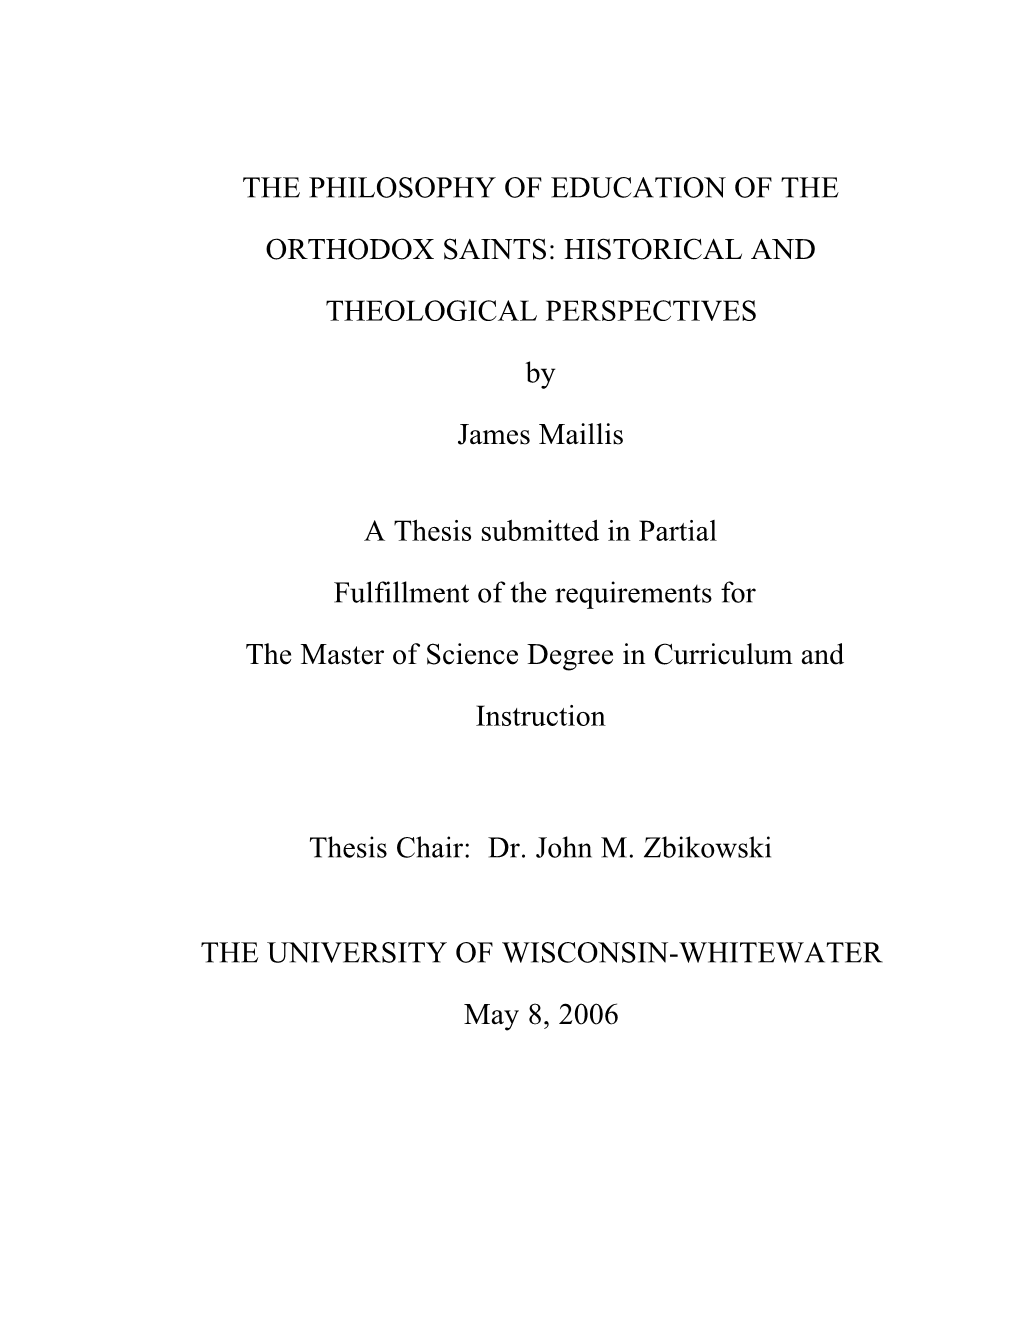 The Philosophy of Education of the Orthodox Saints